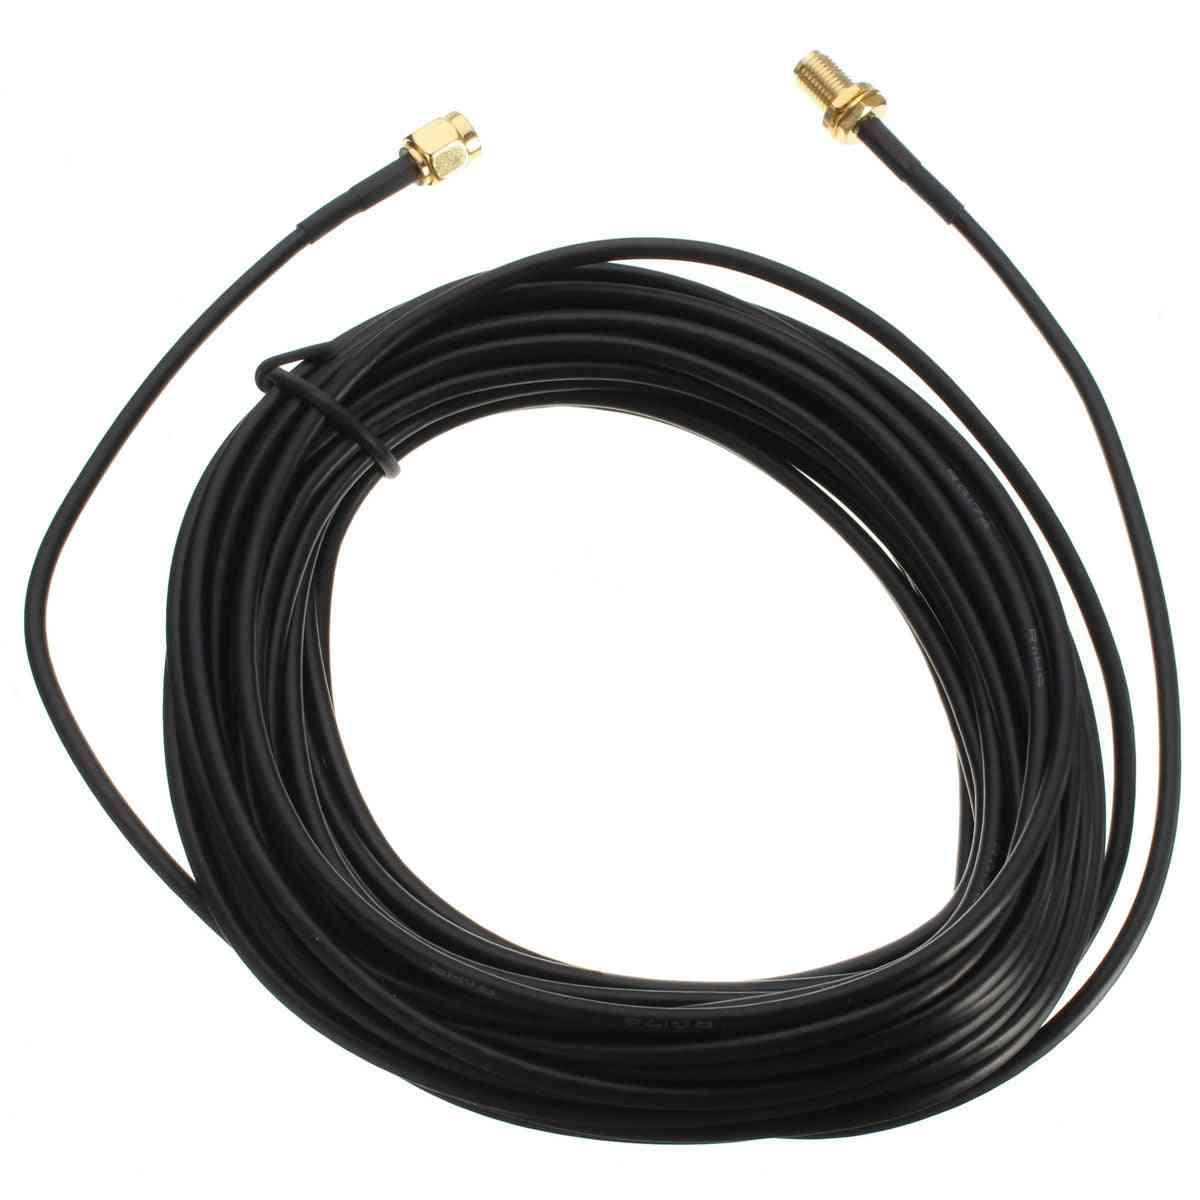 Pure Copper Gold Plated Male To Female Antenna - Rg174 Rp-sma 1m 5m 6m 9m Extension Cable